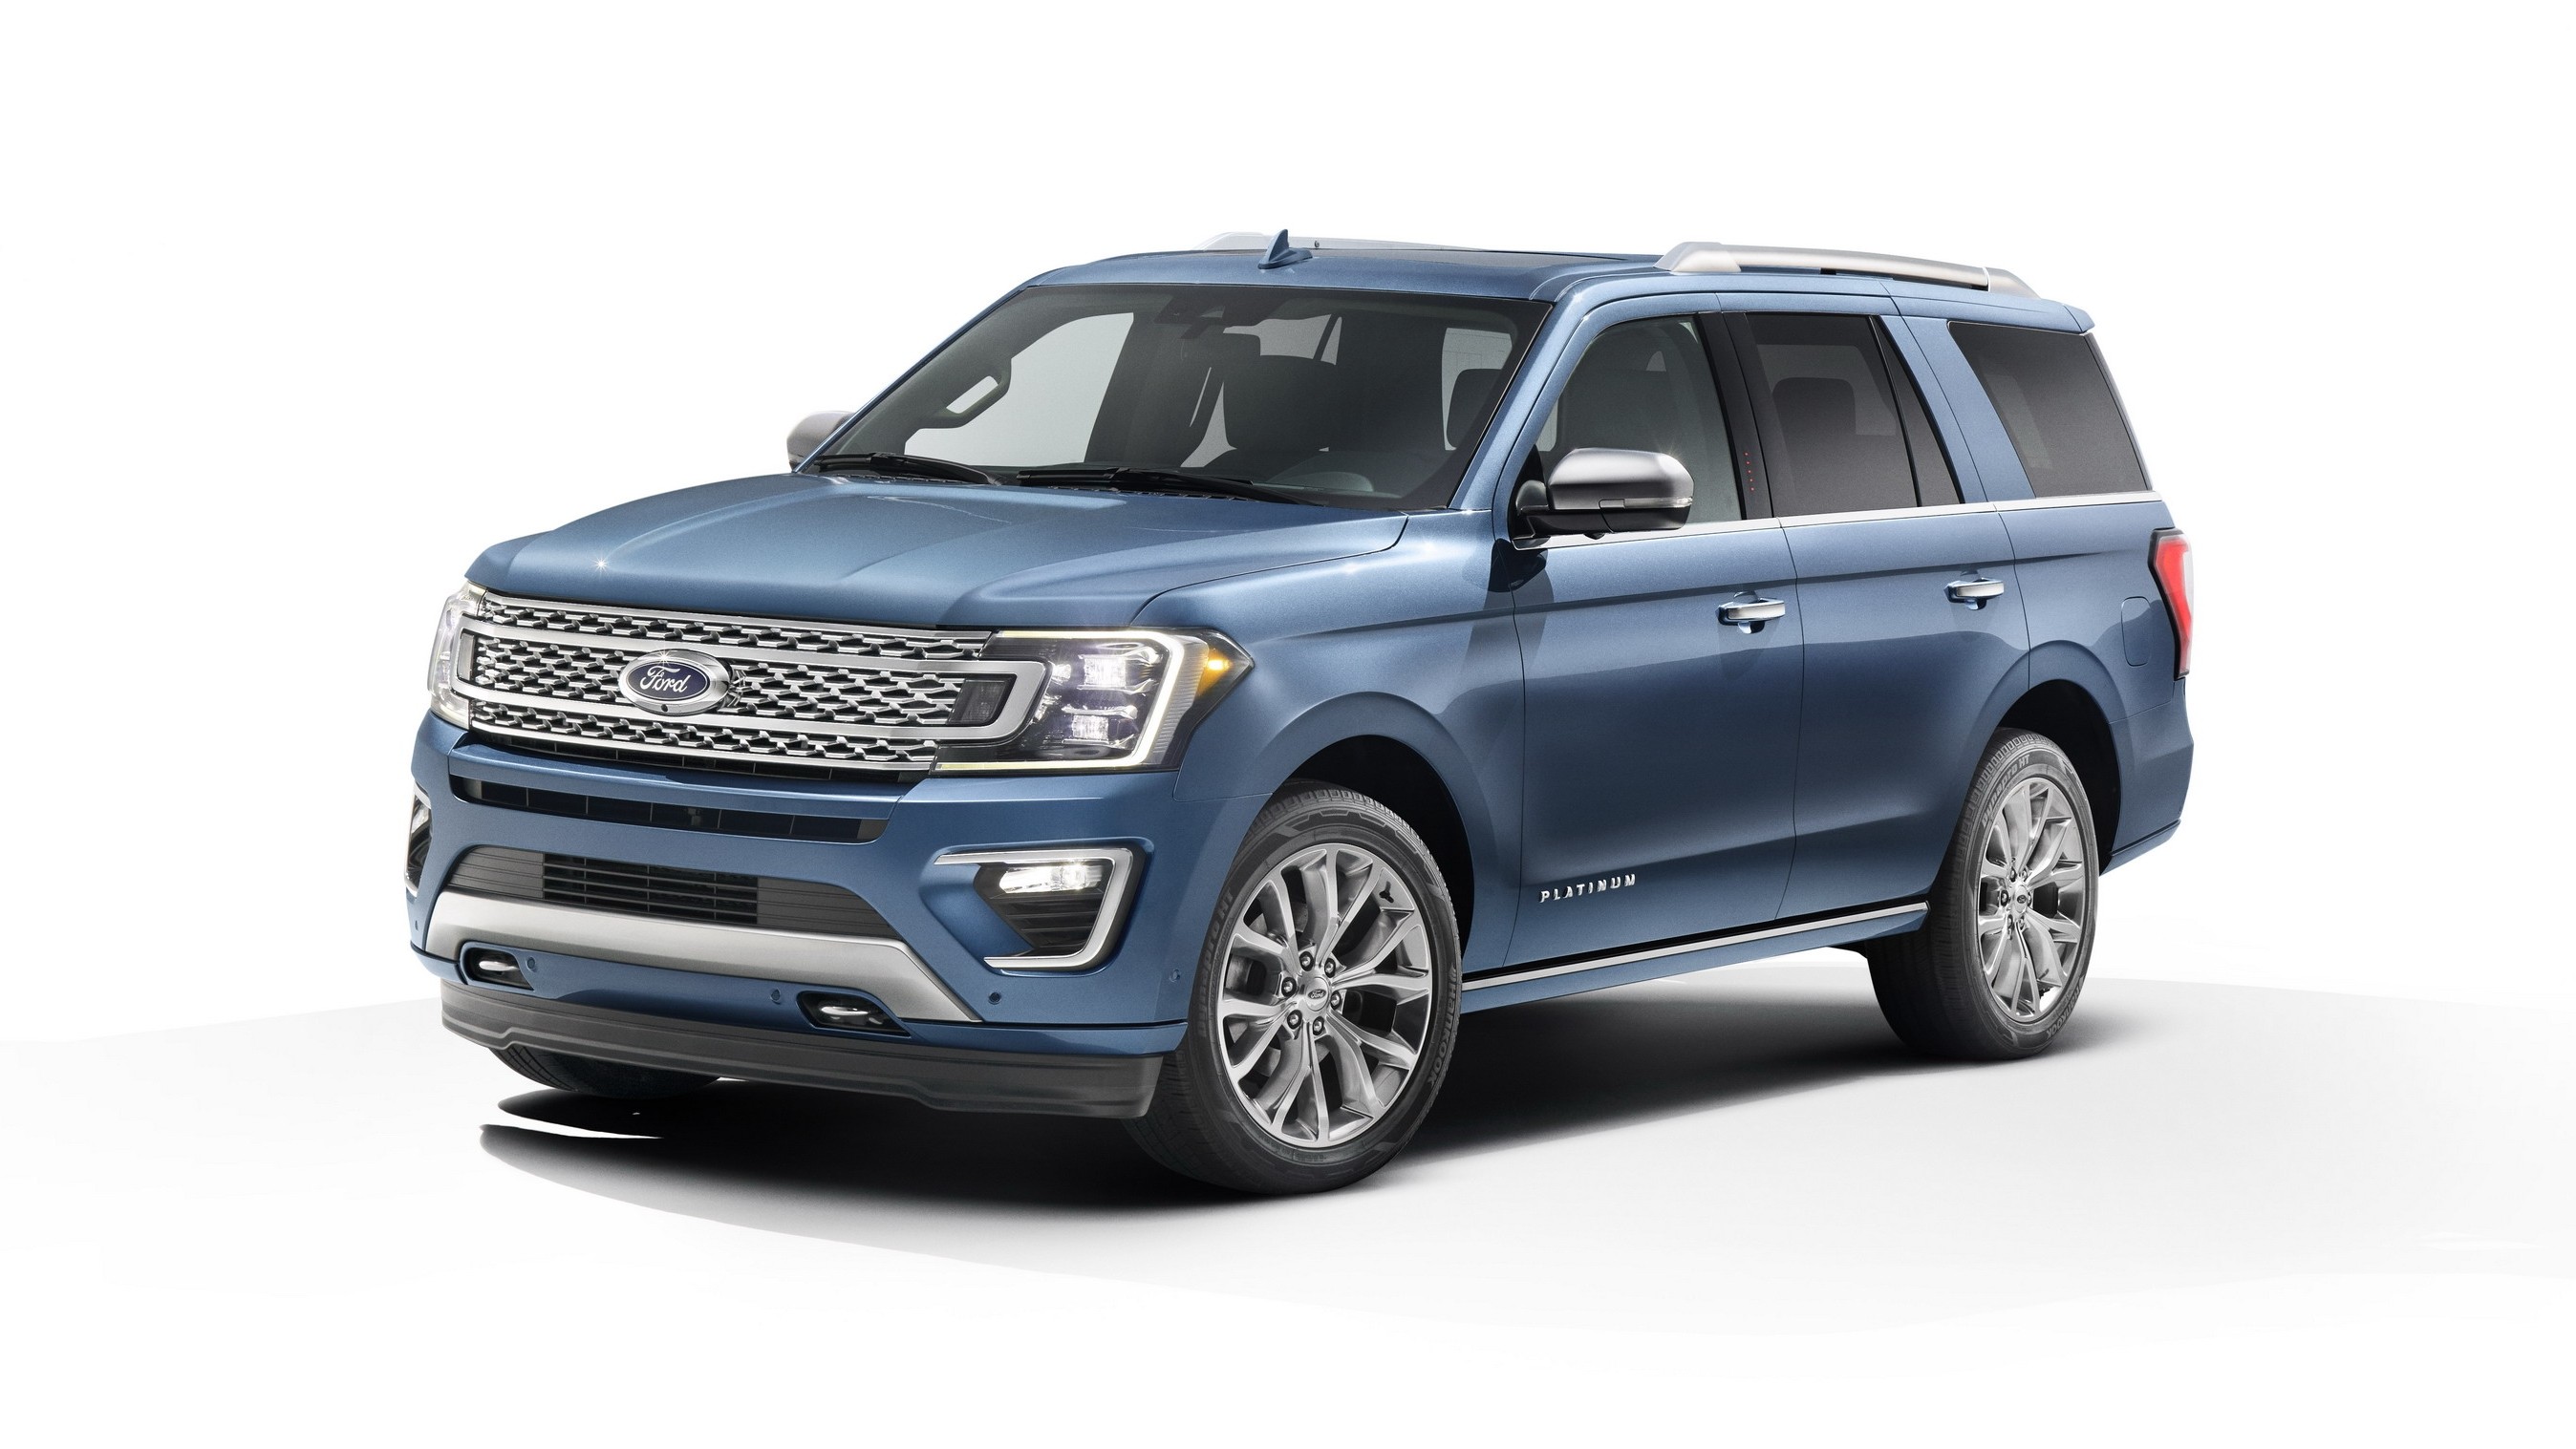 2018 FORD EXPEDITION